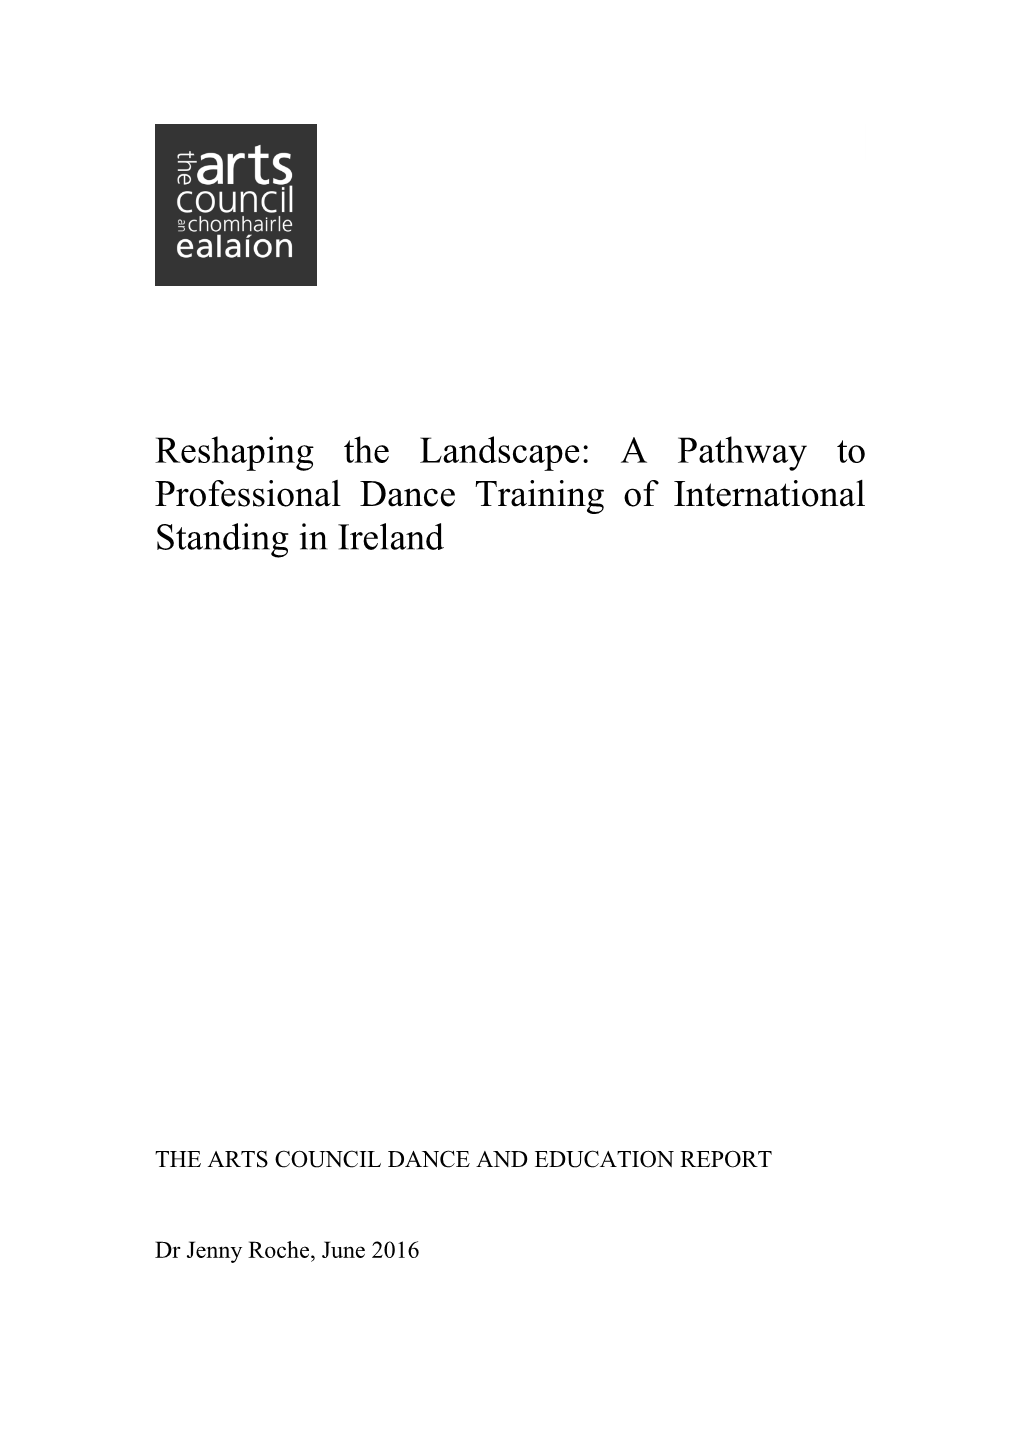 A Pathway to Professional Dance Training of International Standing in Ireland